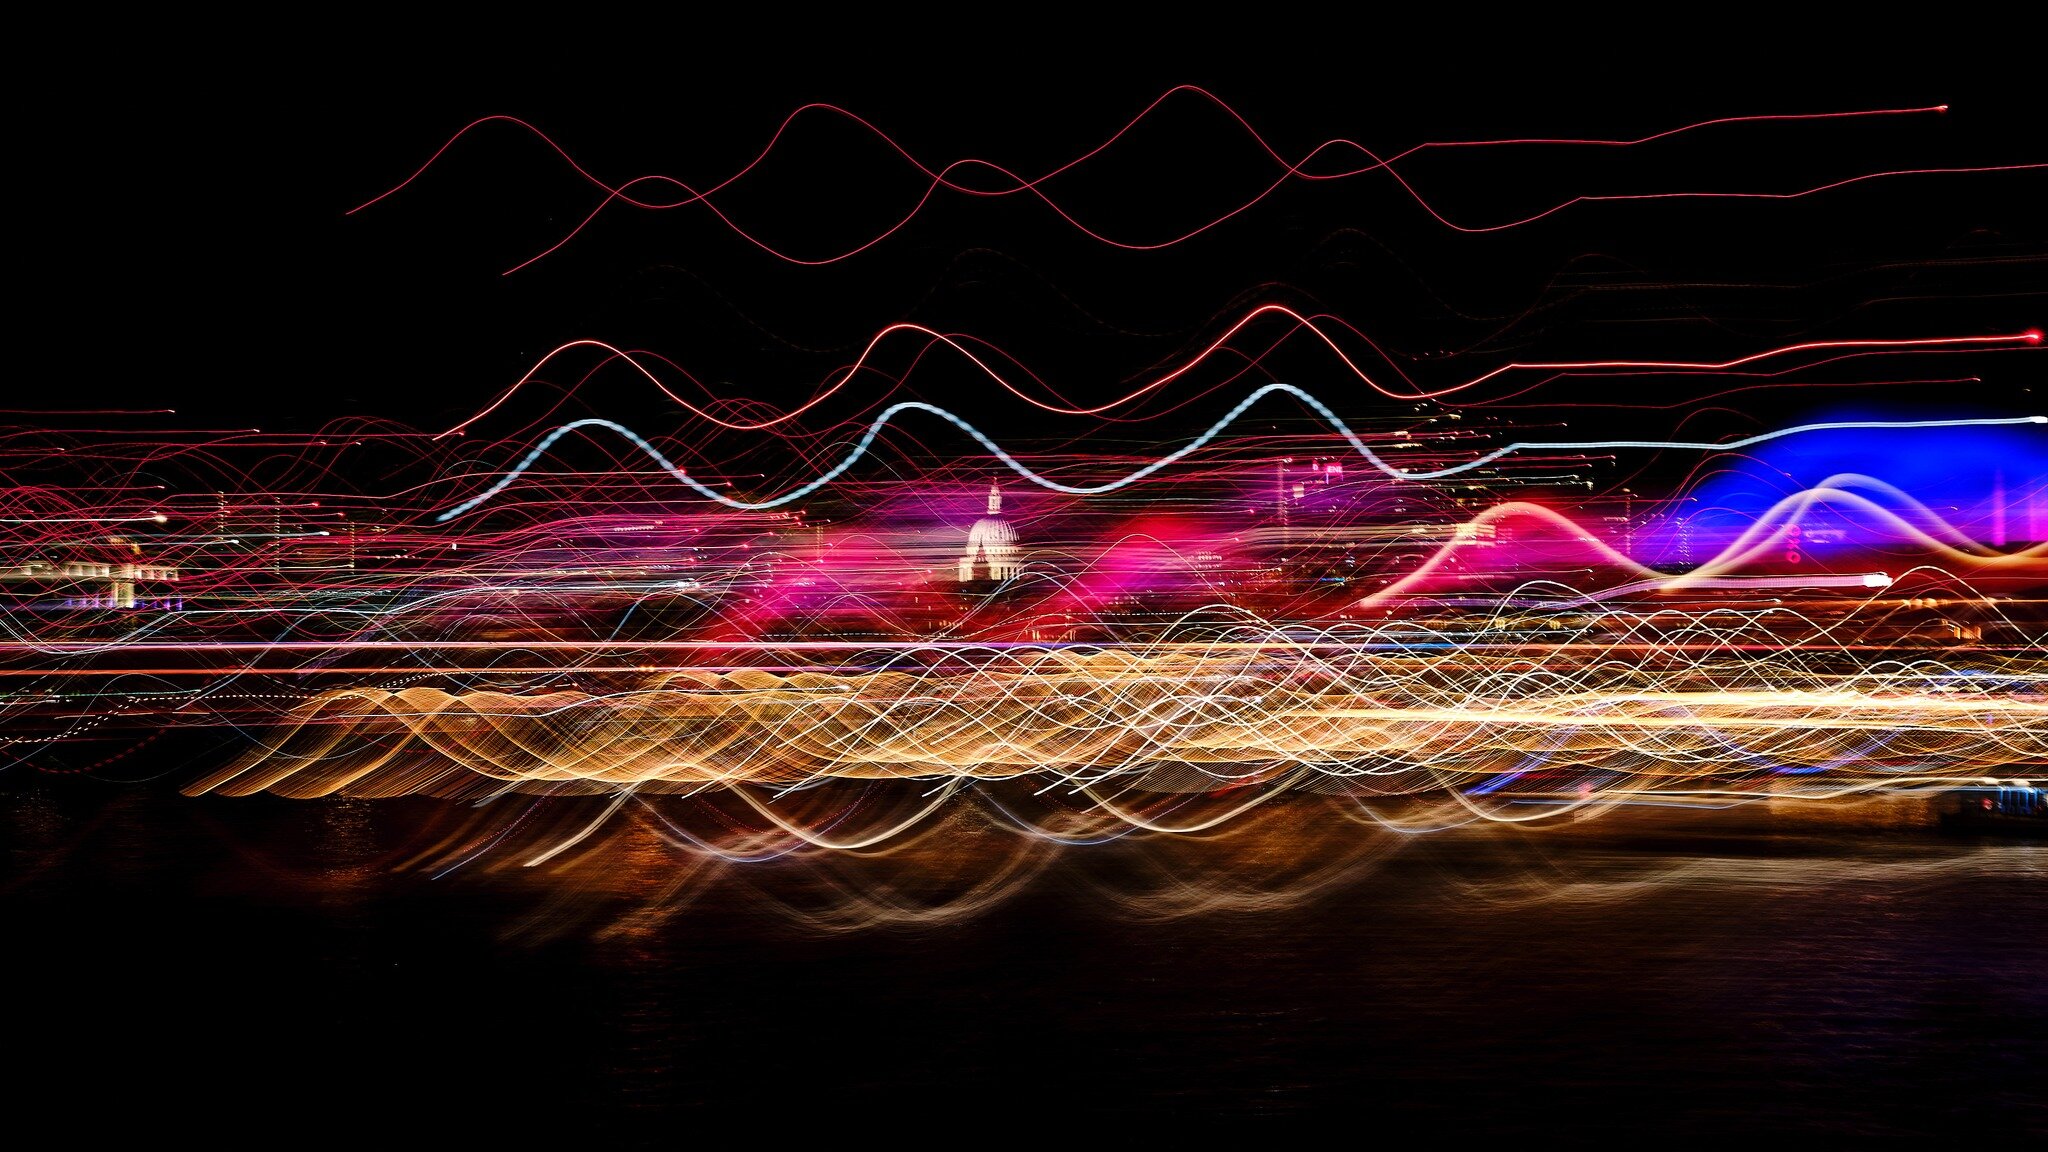 Night Noise - A view from the millennium bridge. There were so many lights and so much stuff going that I wanted to make an image that gave that sense of activity and rushing about with St Paul's just sitting there in the middle watching it all happe